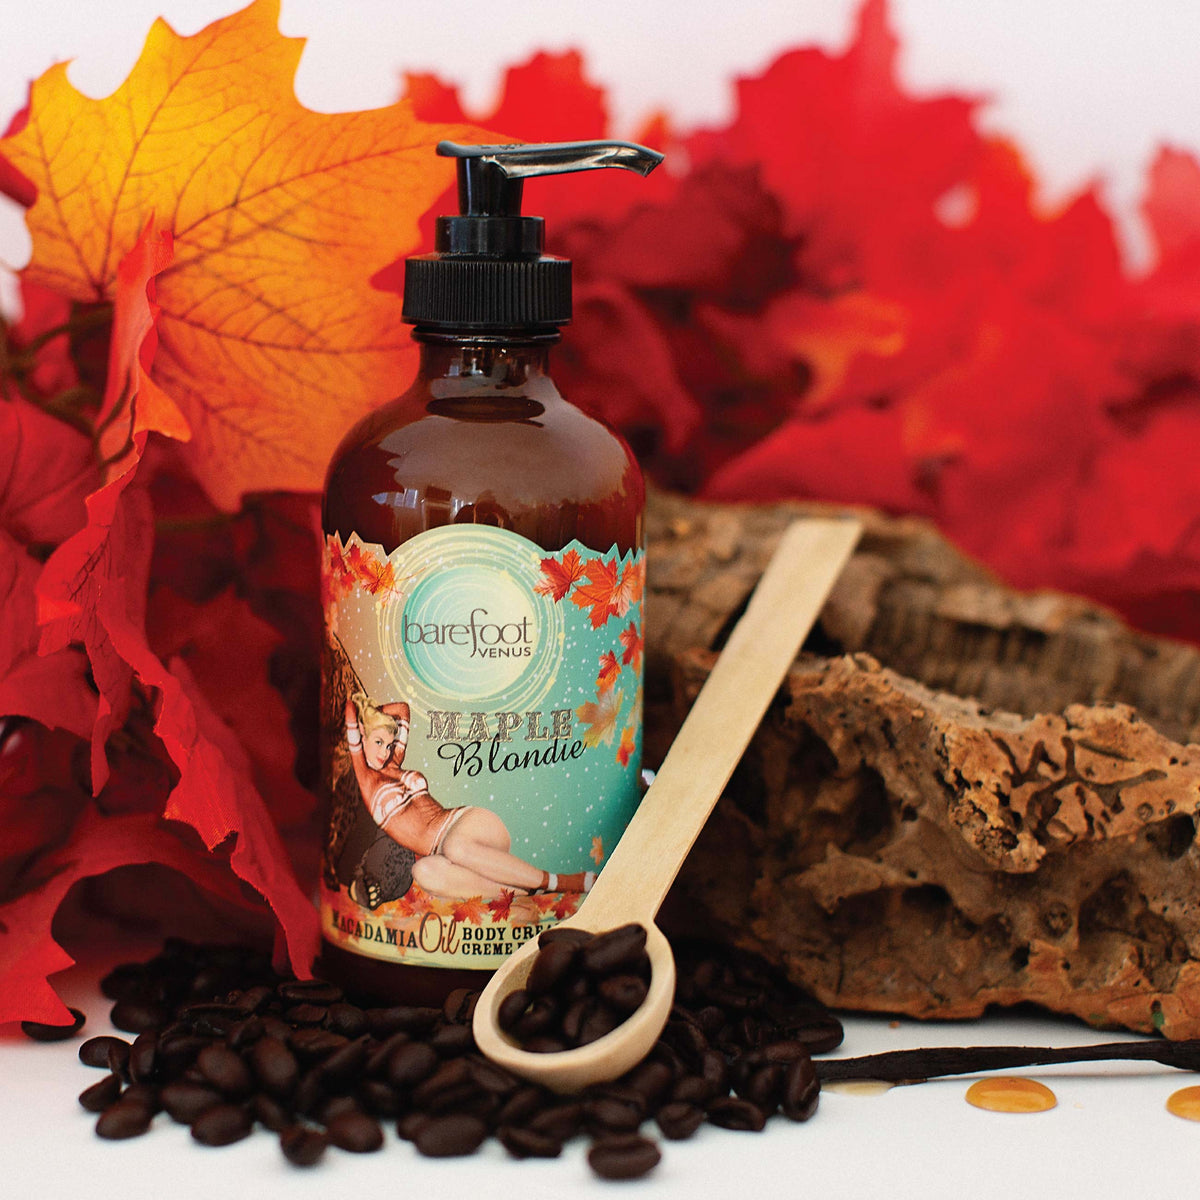 Maple Blondie Body Cream HYDRATION BOOST FOR VISIBLY HEALTHY SKIN. Barefoot Venus